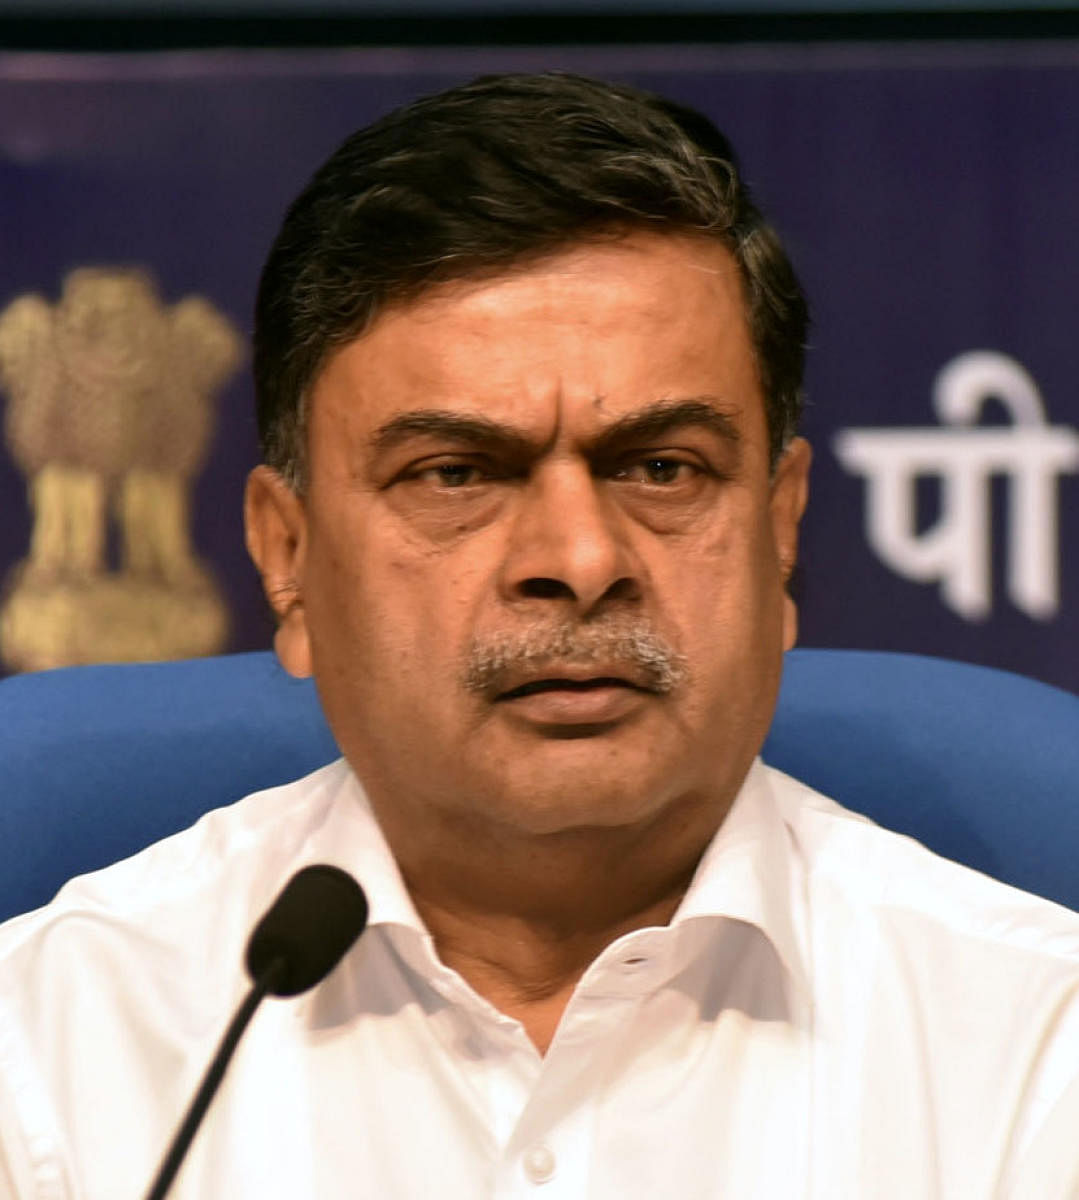 "I have to help the discoms of all states to make them viable by reducing their losses," Union Power Minister R K Singh said.